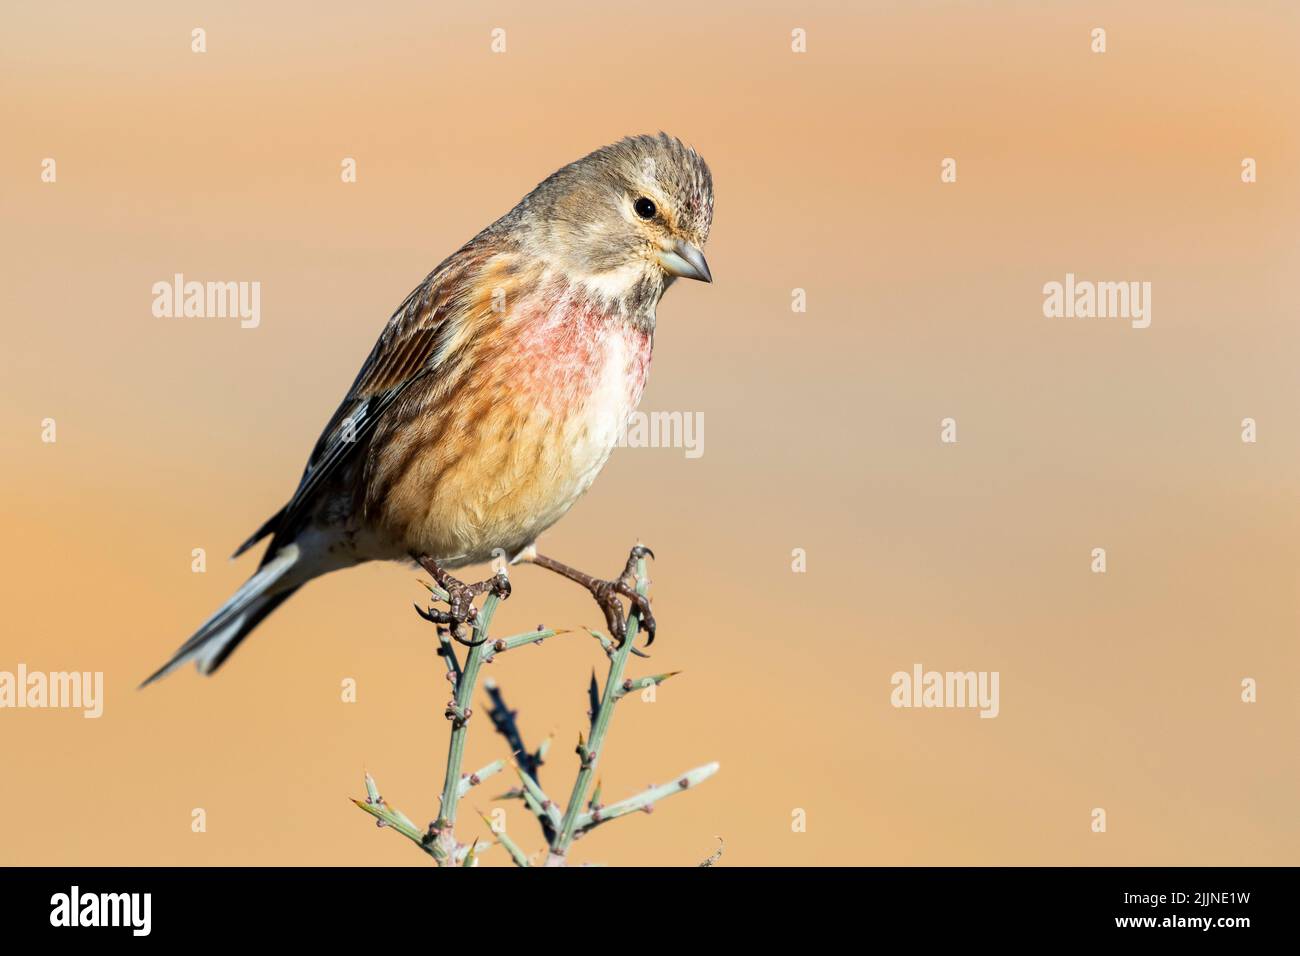 Common linnet male (carduelis cannabina) perched on a twig against a blurred natural background. Spain Stock Photo